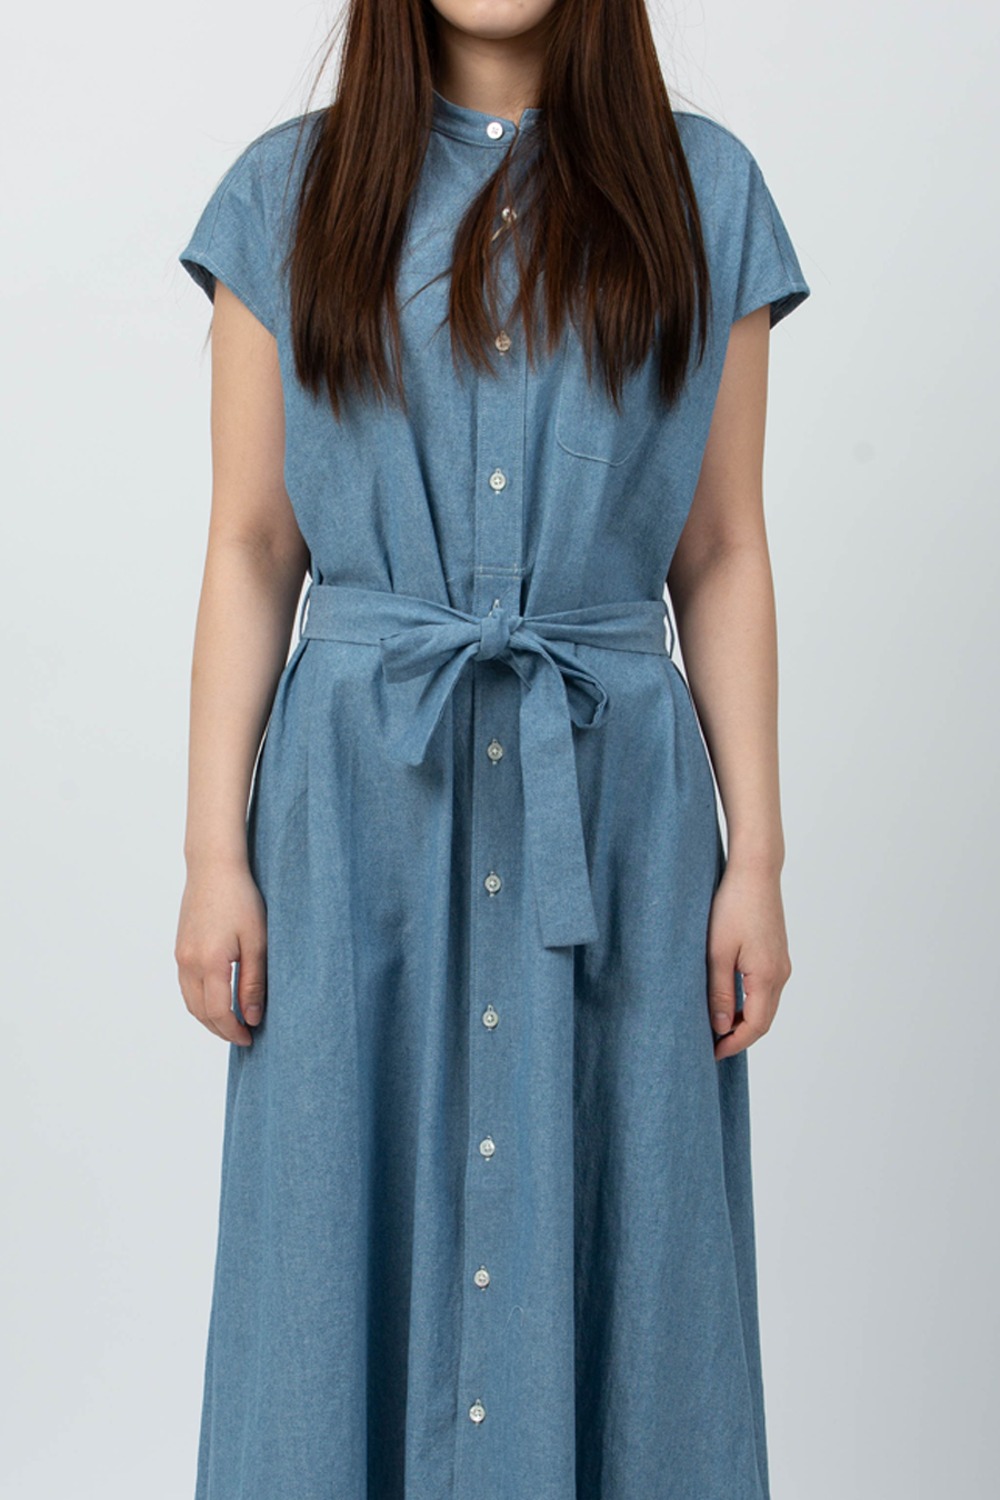 (24SS) BANDED COLLAR DRESS LIGHT BLUE 4.5OZ COTTON CHAMBRAY